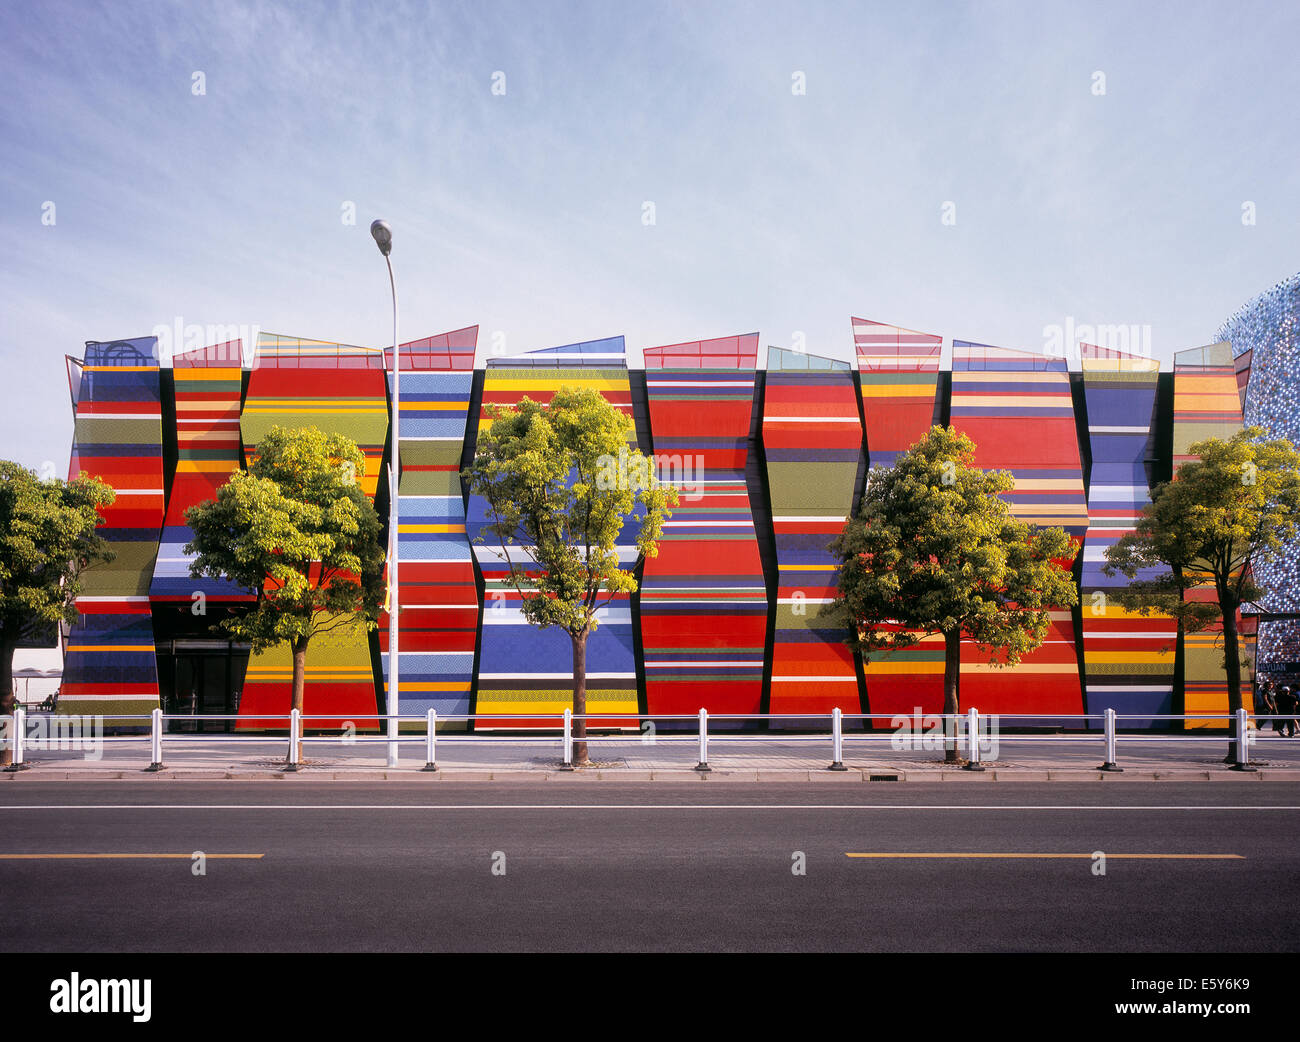 Colorful Estonian Pavilion at the Expo site in Shanghai, China. Stock Photo